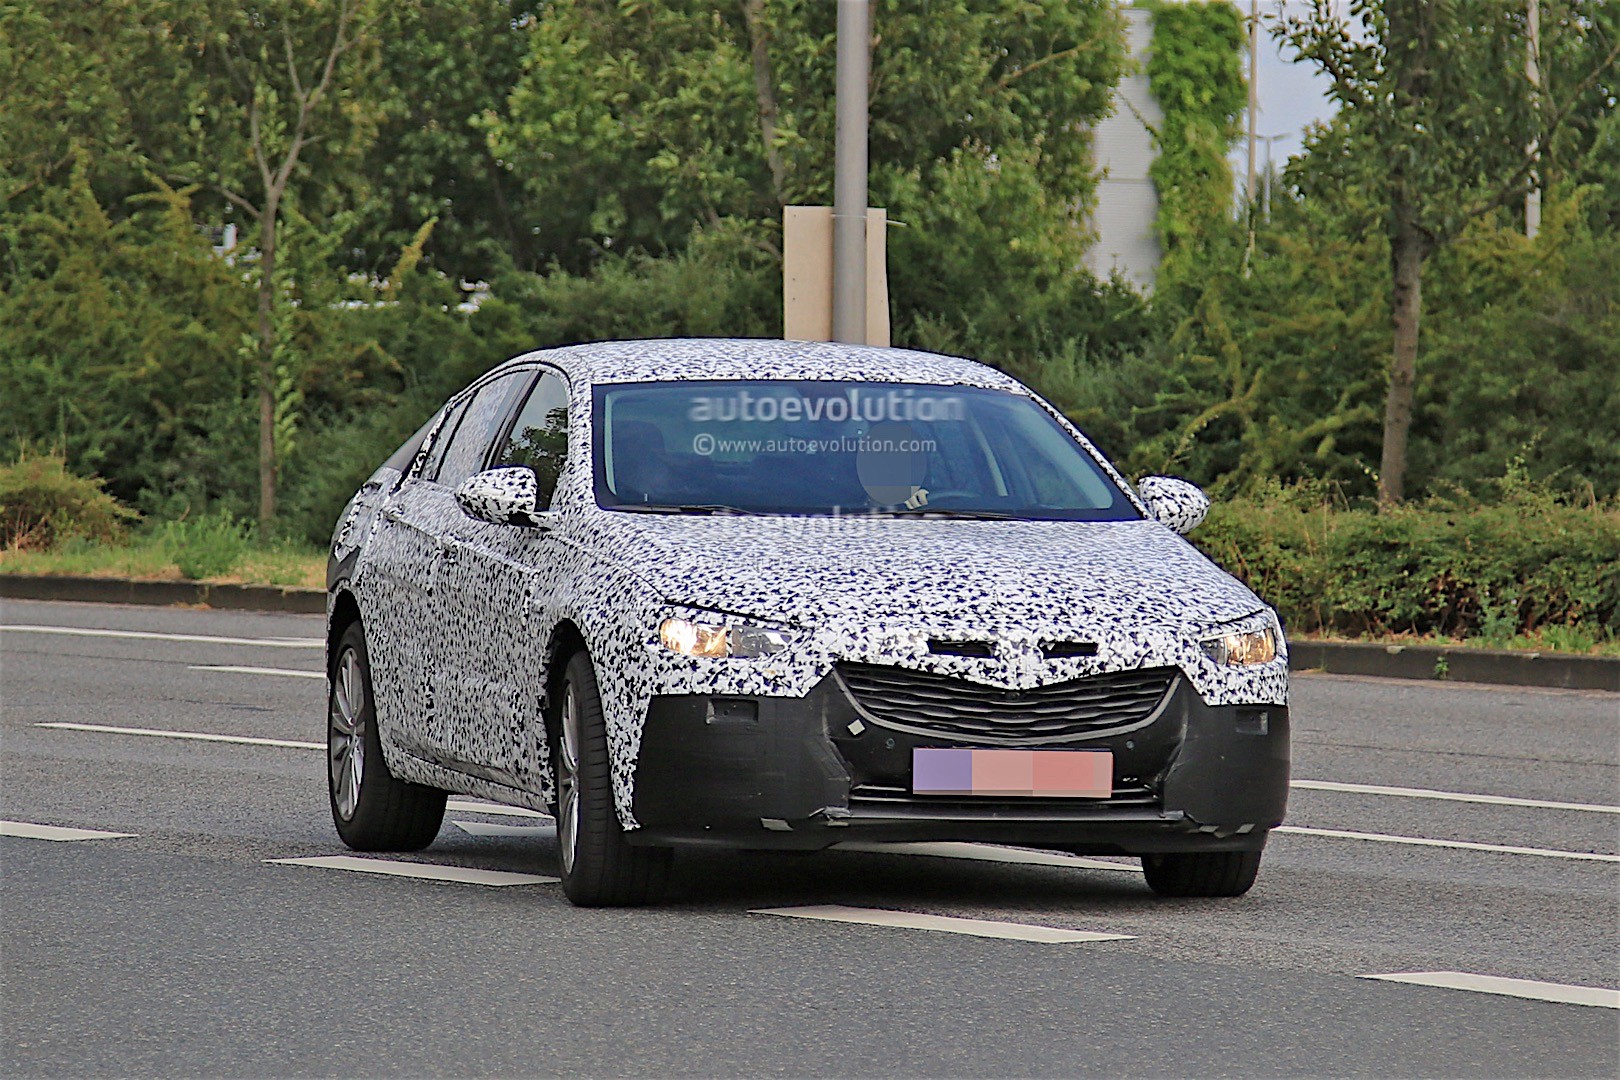 2017 Opel Insignia Spied With Less Camouflage, Expect To See It Unveiled  Soon - autoevolution